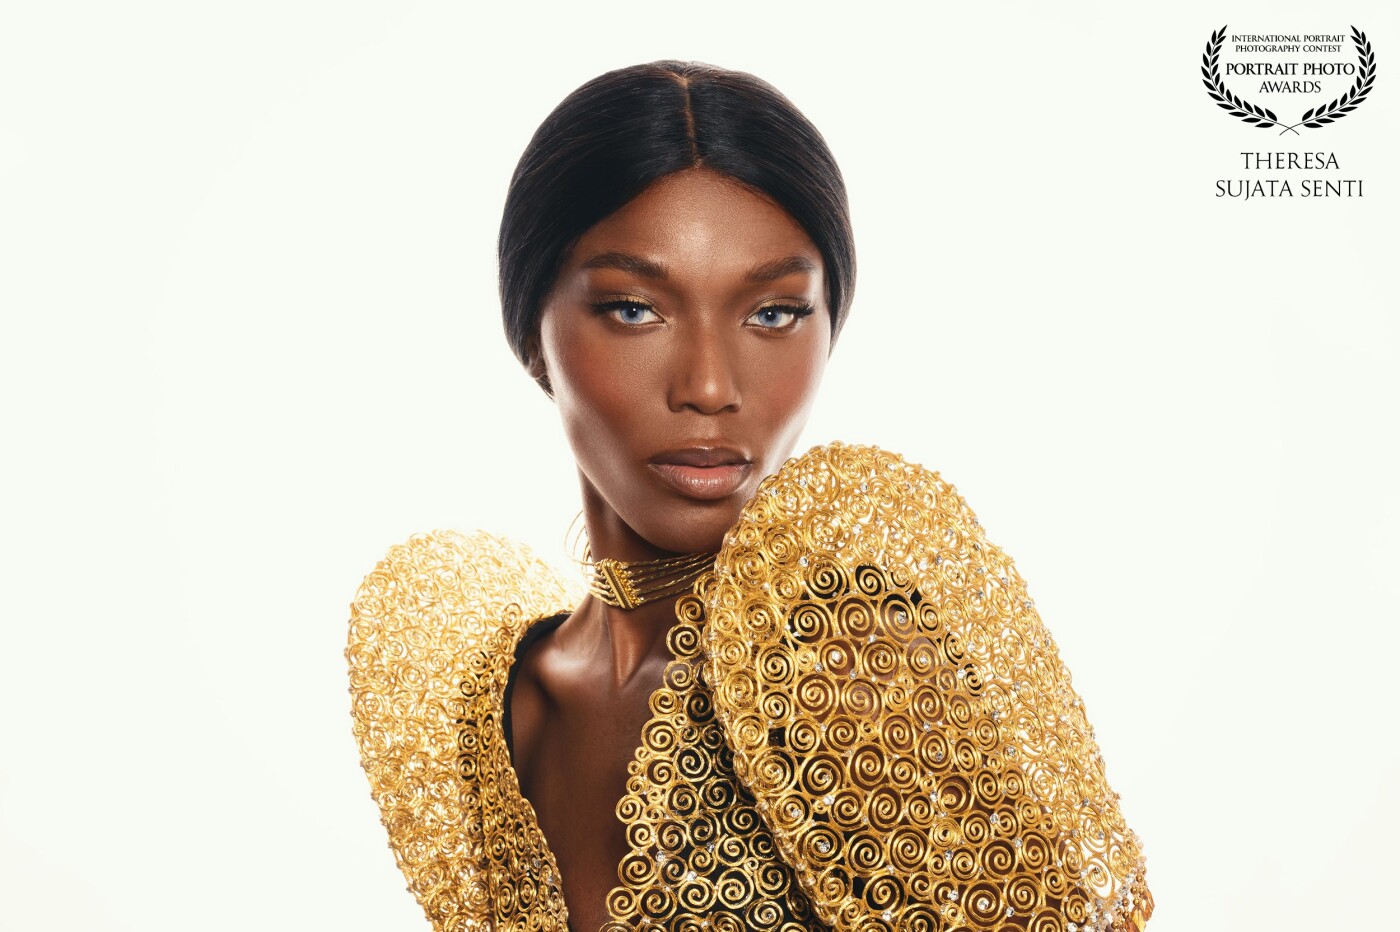 I had the pleasure to work with a fabulous team for this shoot:<br />
Model Suki Ai (@suki.aii), a beauty with African roots and designer Lionell Christian P. Lanuzo (@chrislanuzo14) and Make-up Artist Reslie Perez Mundwiler-de Castro (@magic_touch_by_res), both originally from the Philippines but living in Milano and Zurich, respectively. And then there is myself, a photographer from Liechtenstein. The photoshoot took place in Chur, Switzerland. <br />
A huge thank you to all of you! It was an amazing day!